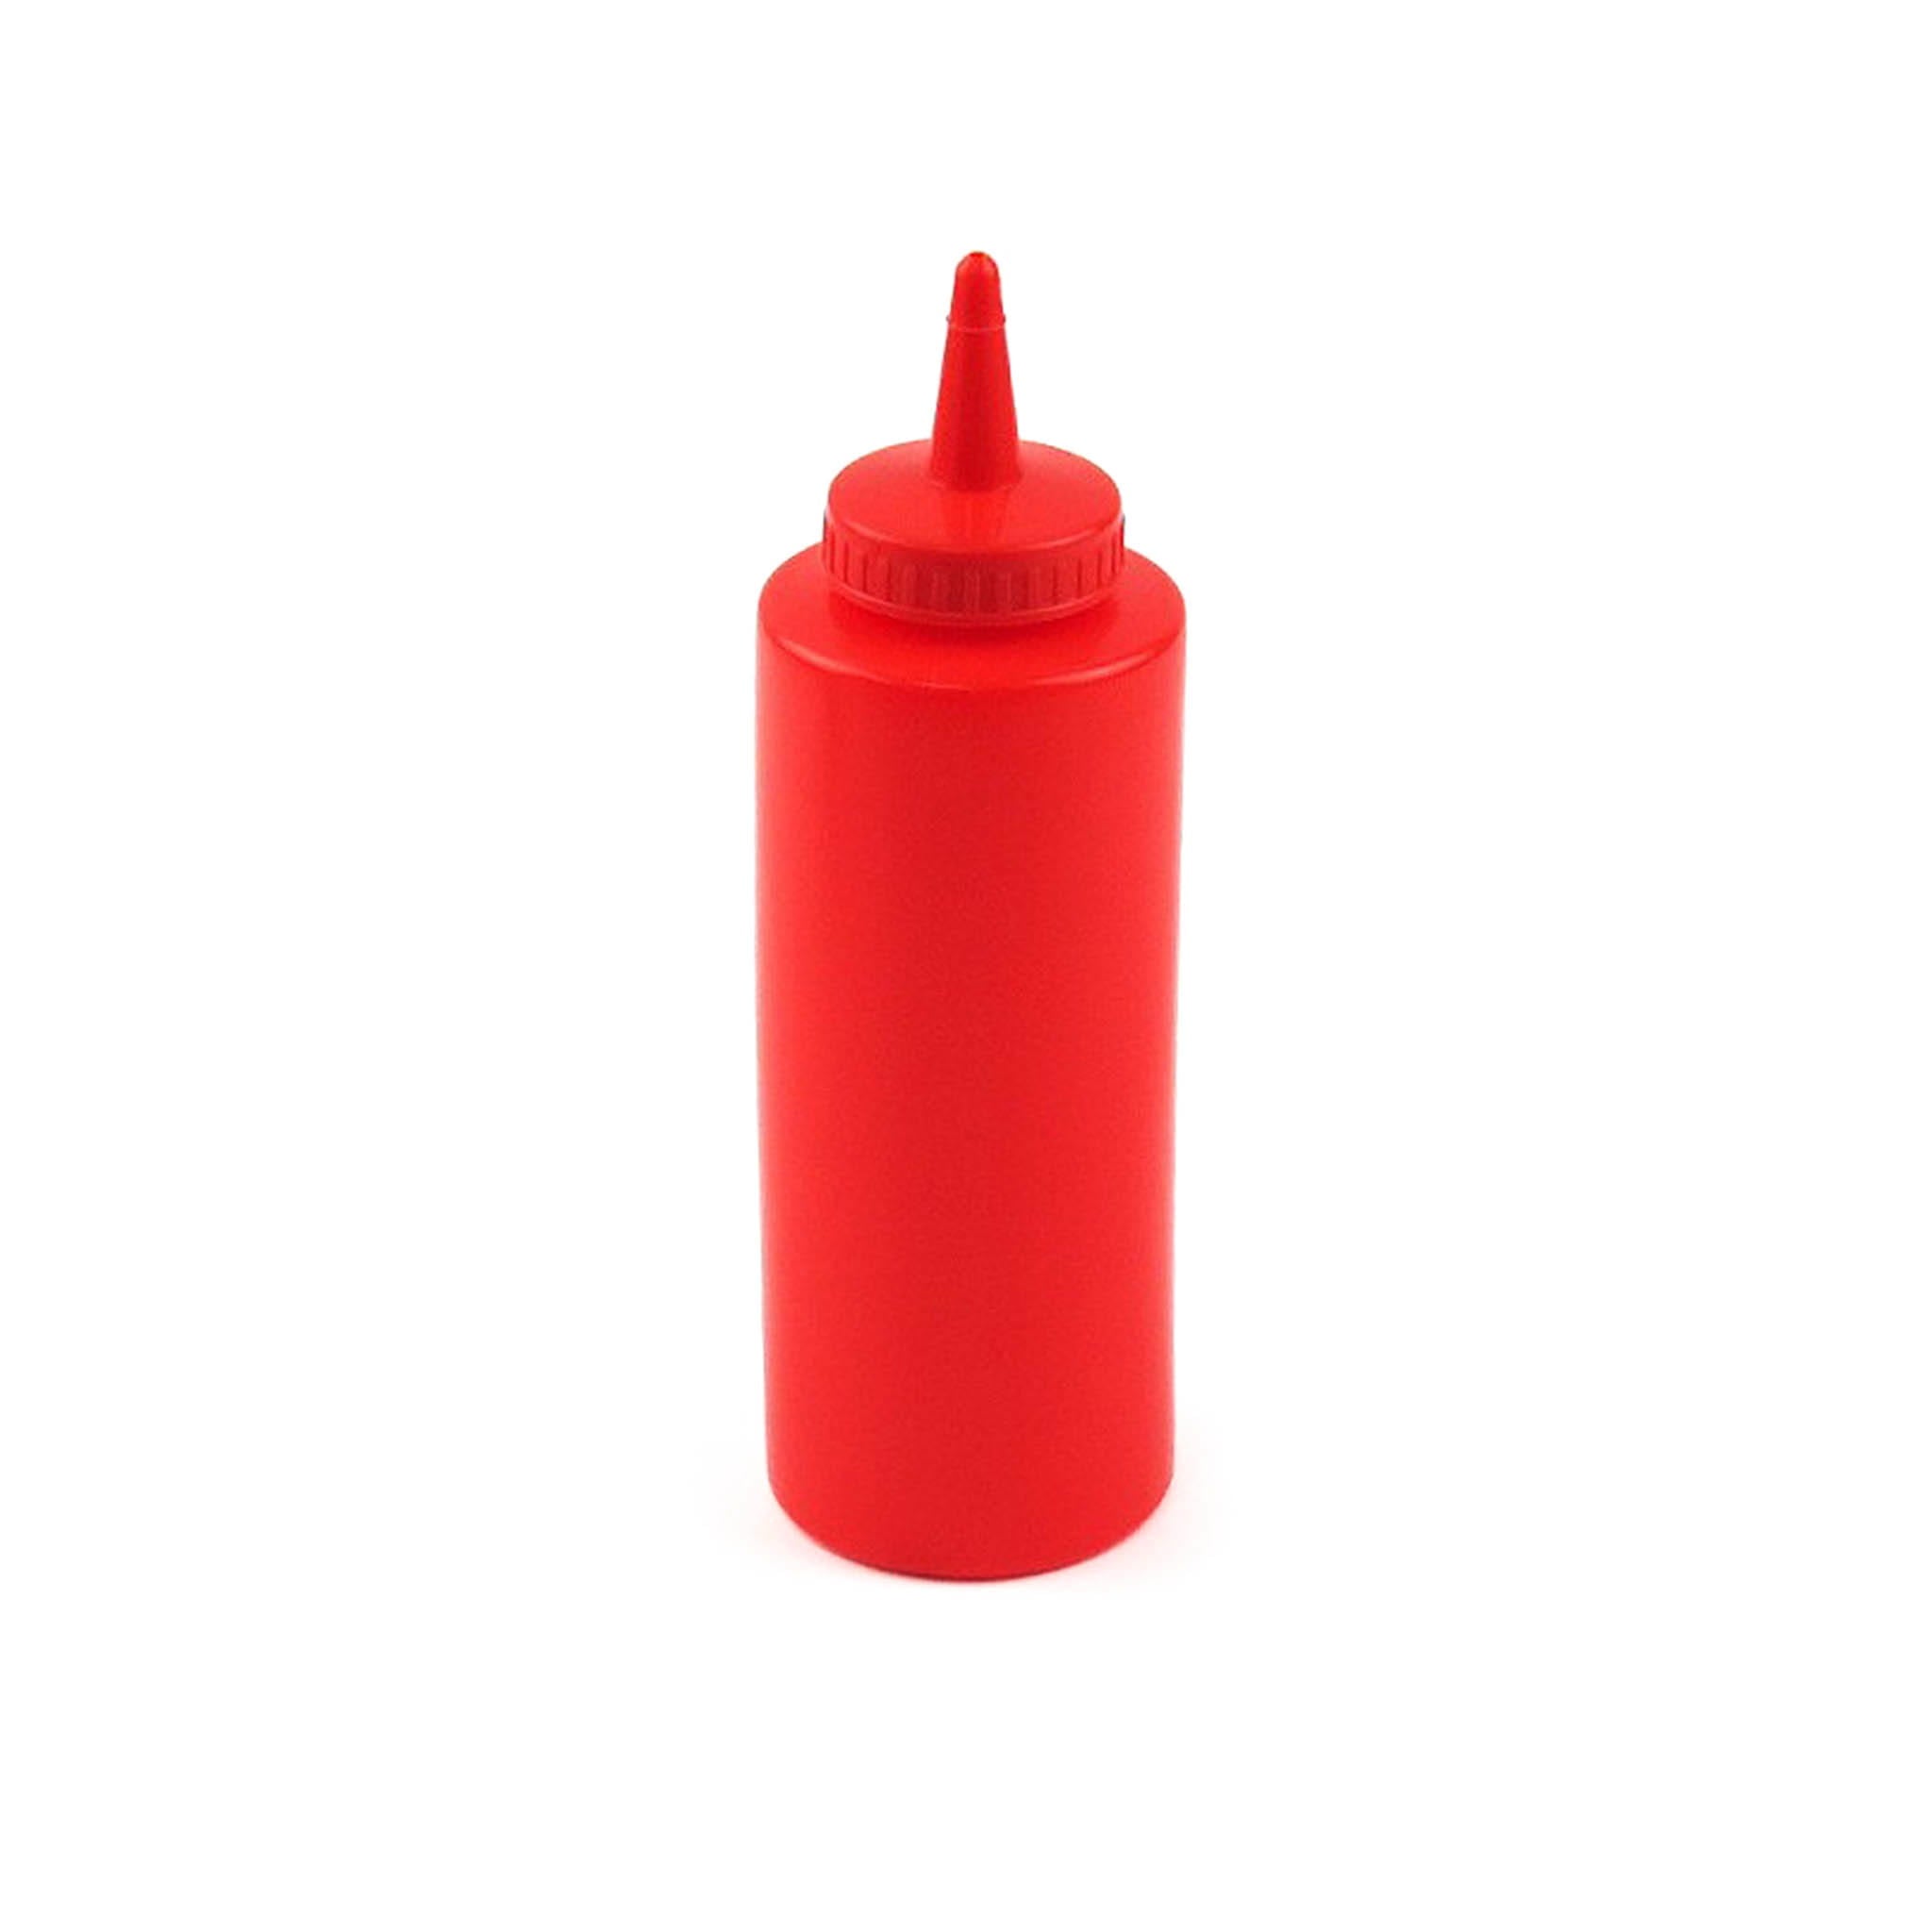 Red Squeezy Bottle for Ketchup, 340ml